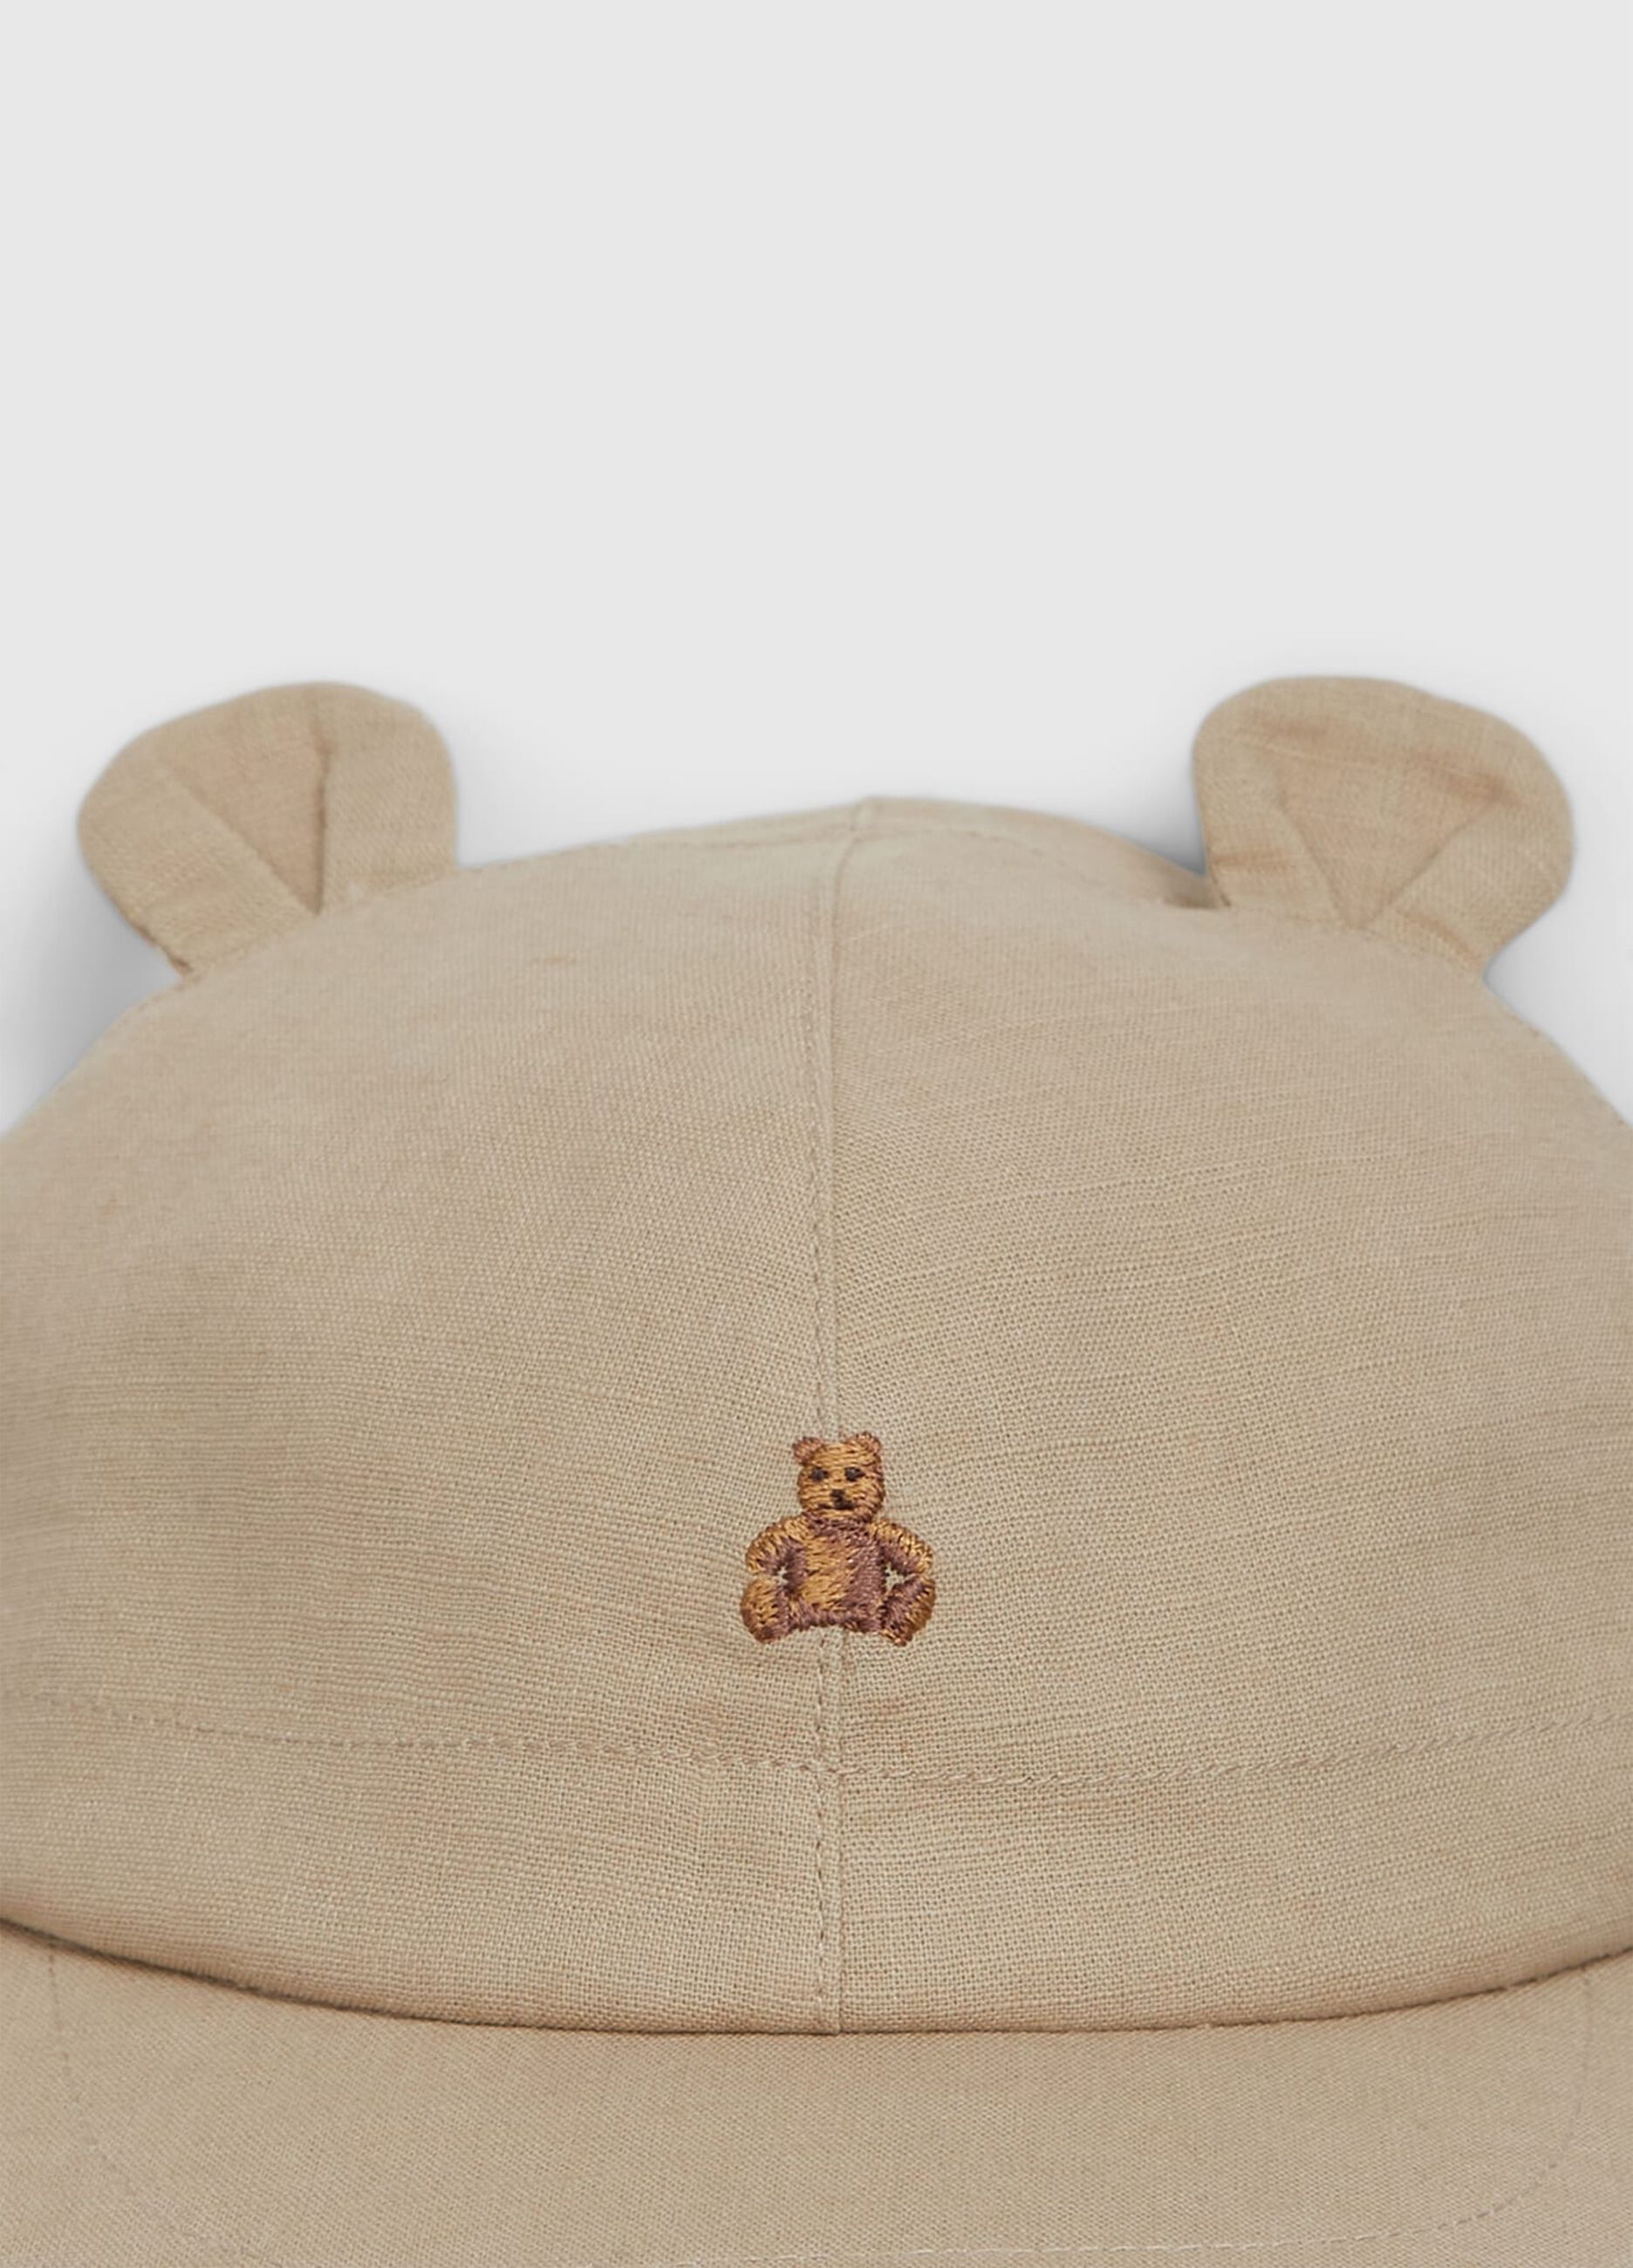 Linen and cotton hat with teddy bear embroidery